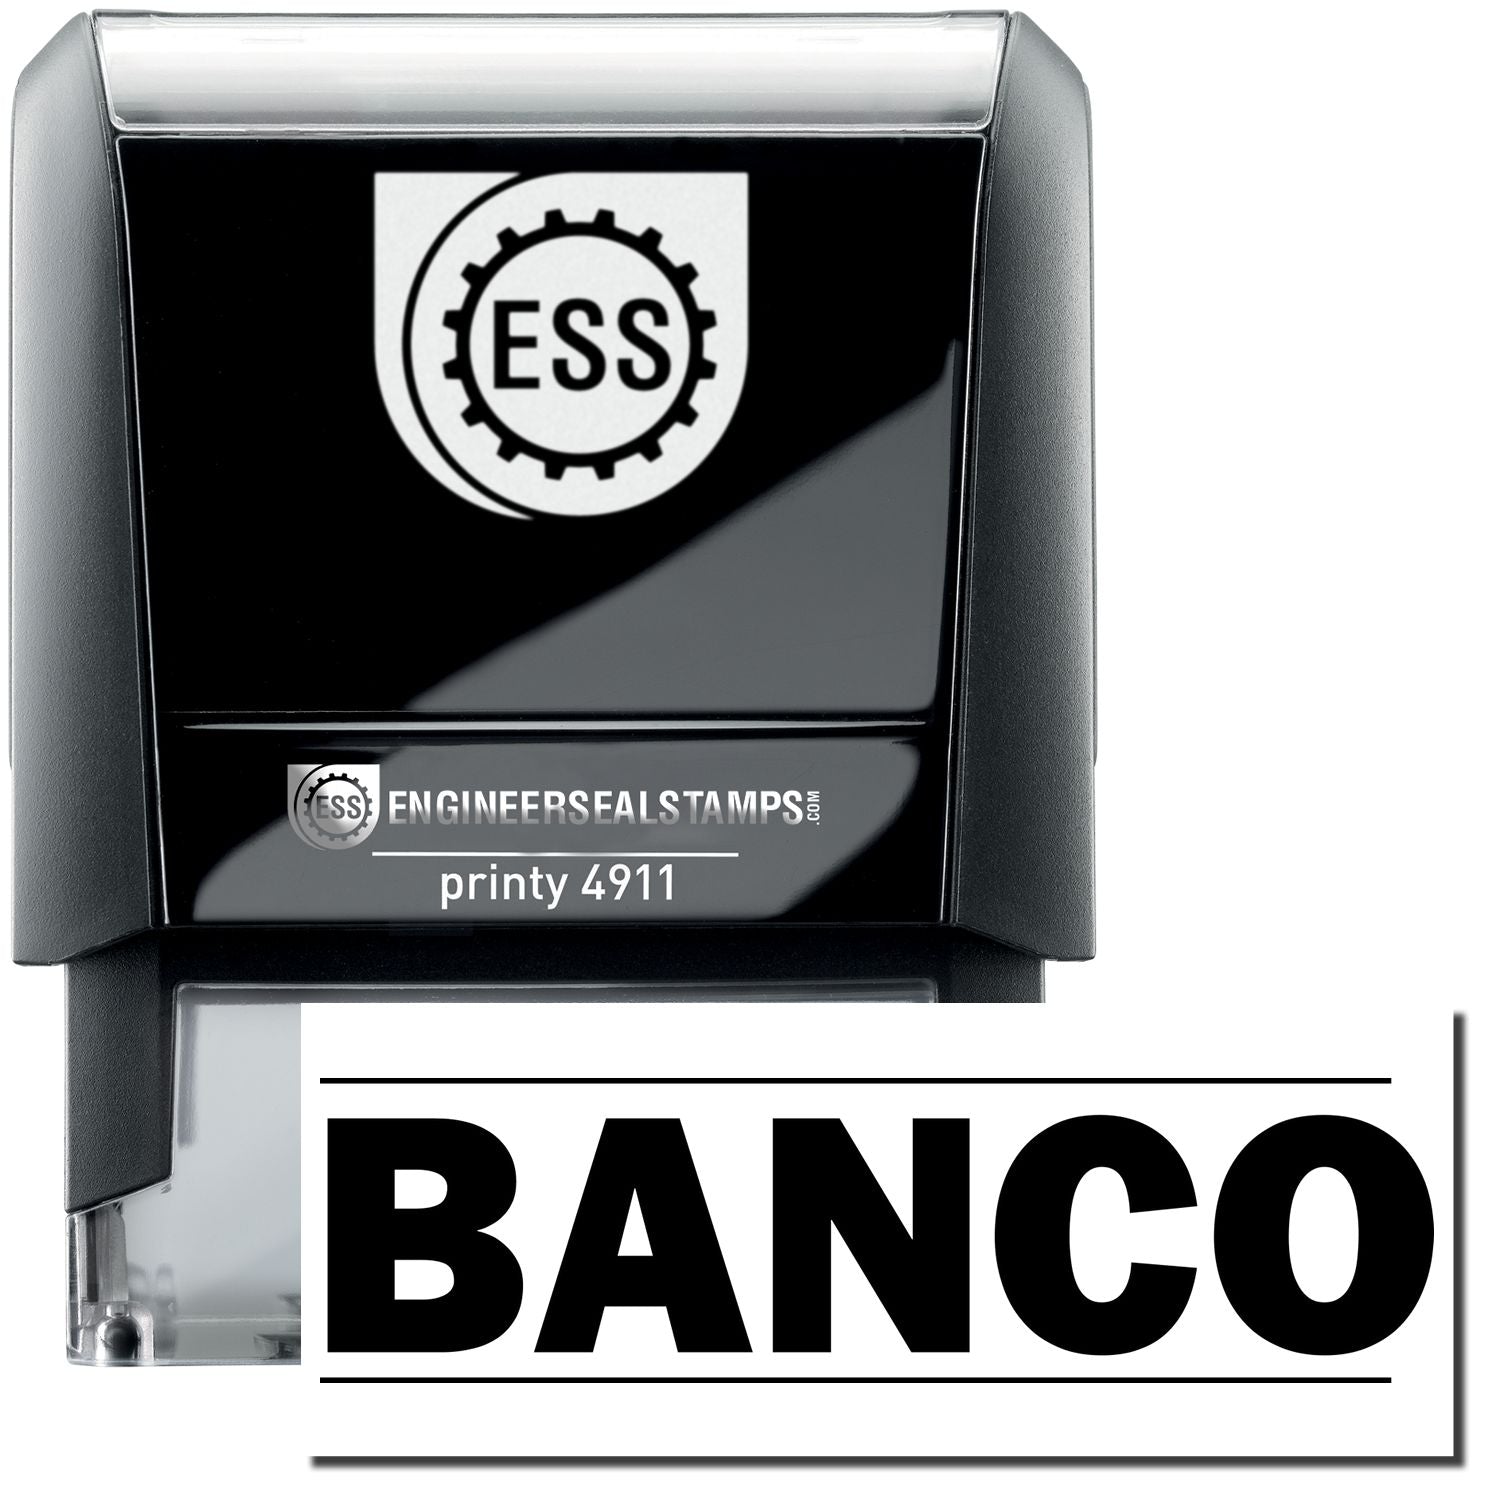 A self-inking stamp with a stamped image showing how the text "BANCO" in bold font (with a line both above and below the text) is displayed after stamping.